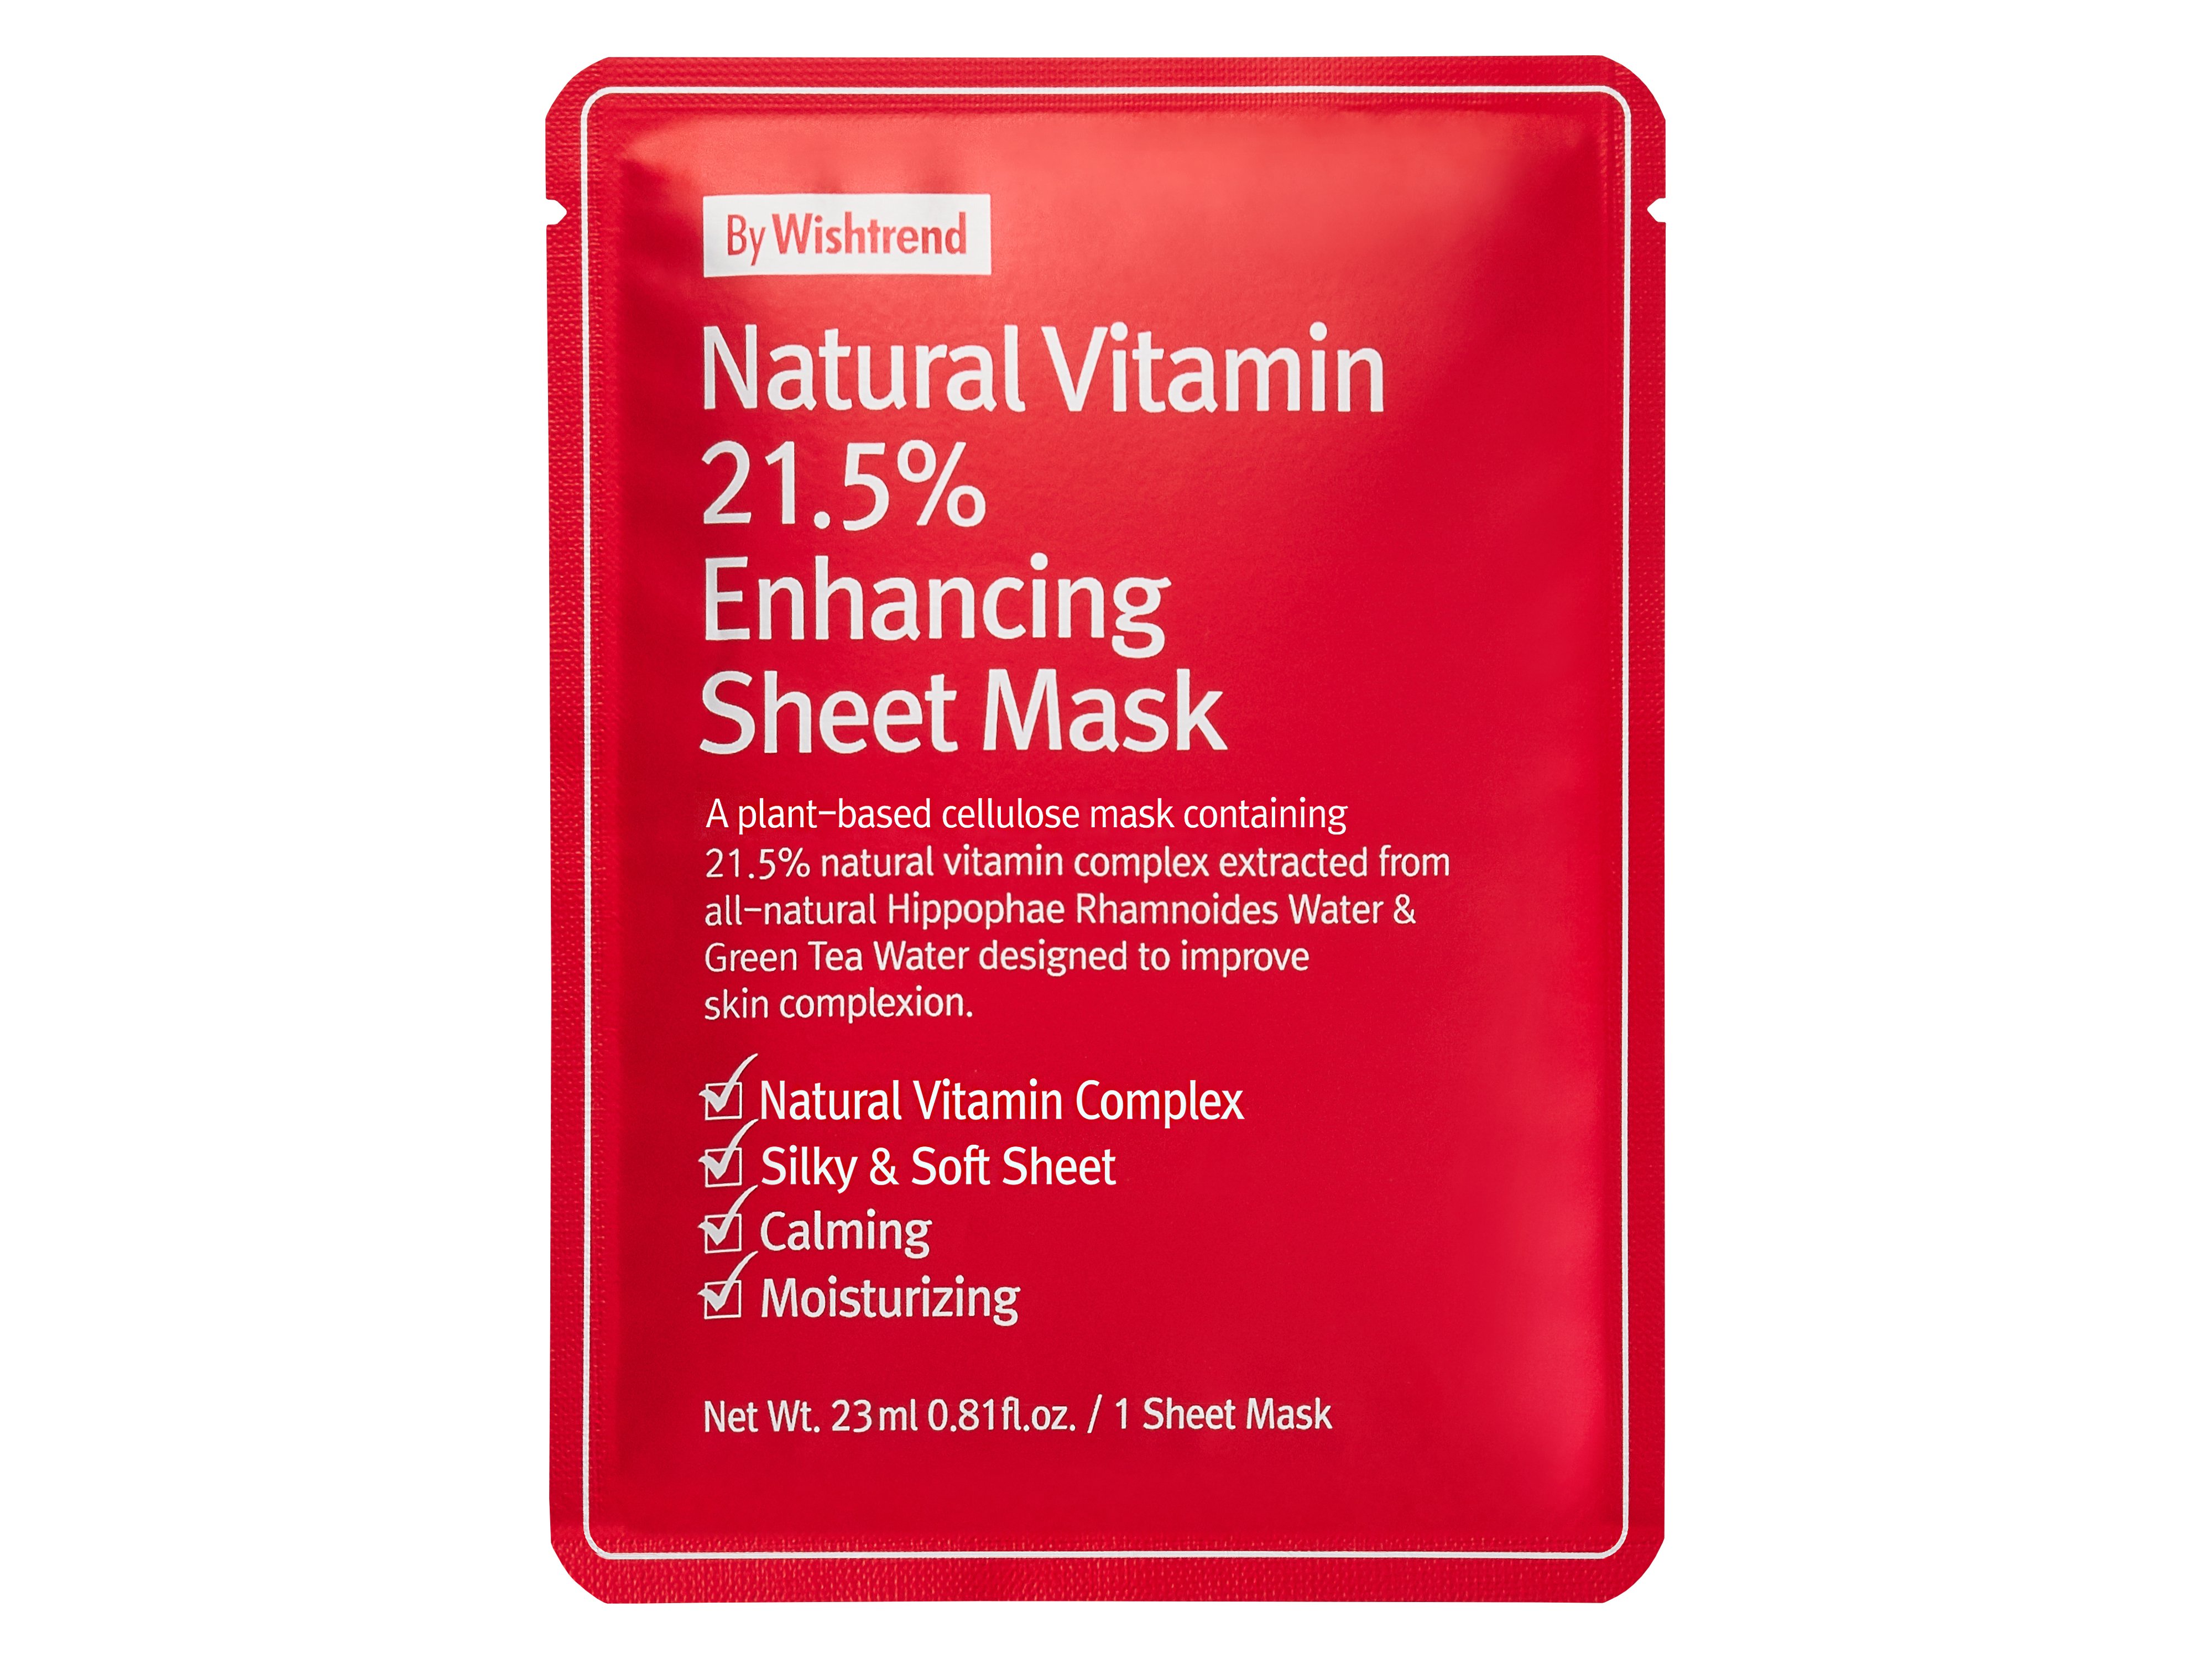 By Wishtrend Natural Vitamin Sheet Mask, 1 stk